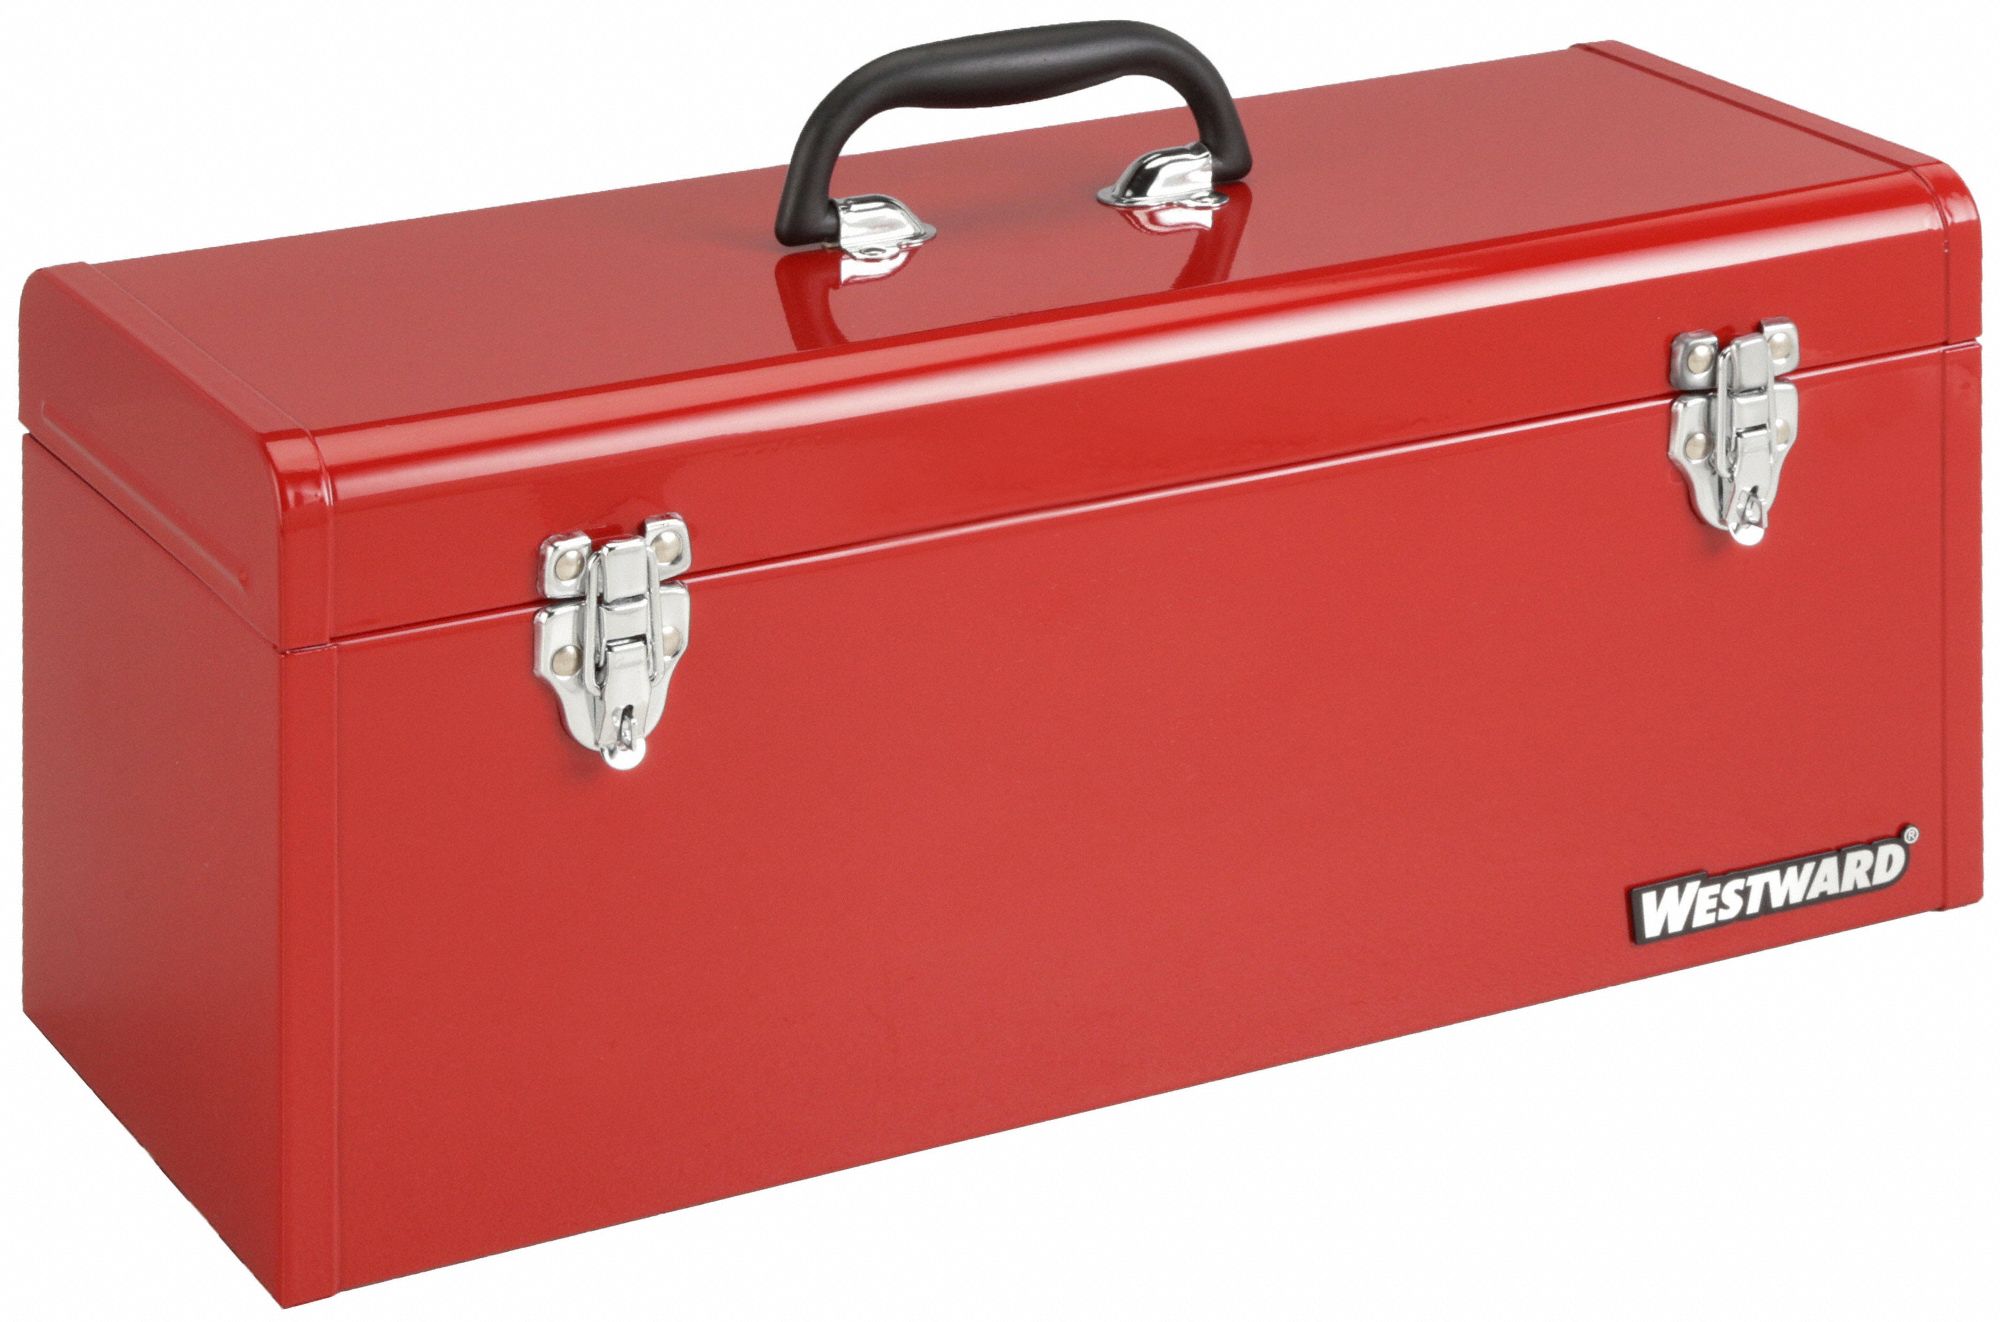 WESTWARD PORTABLE TOOL BX 20X7-7/8 X9 RD - Tool Boxes and Cases - GGG36Y008